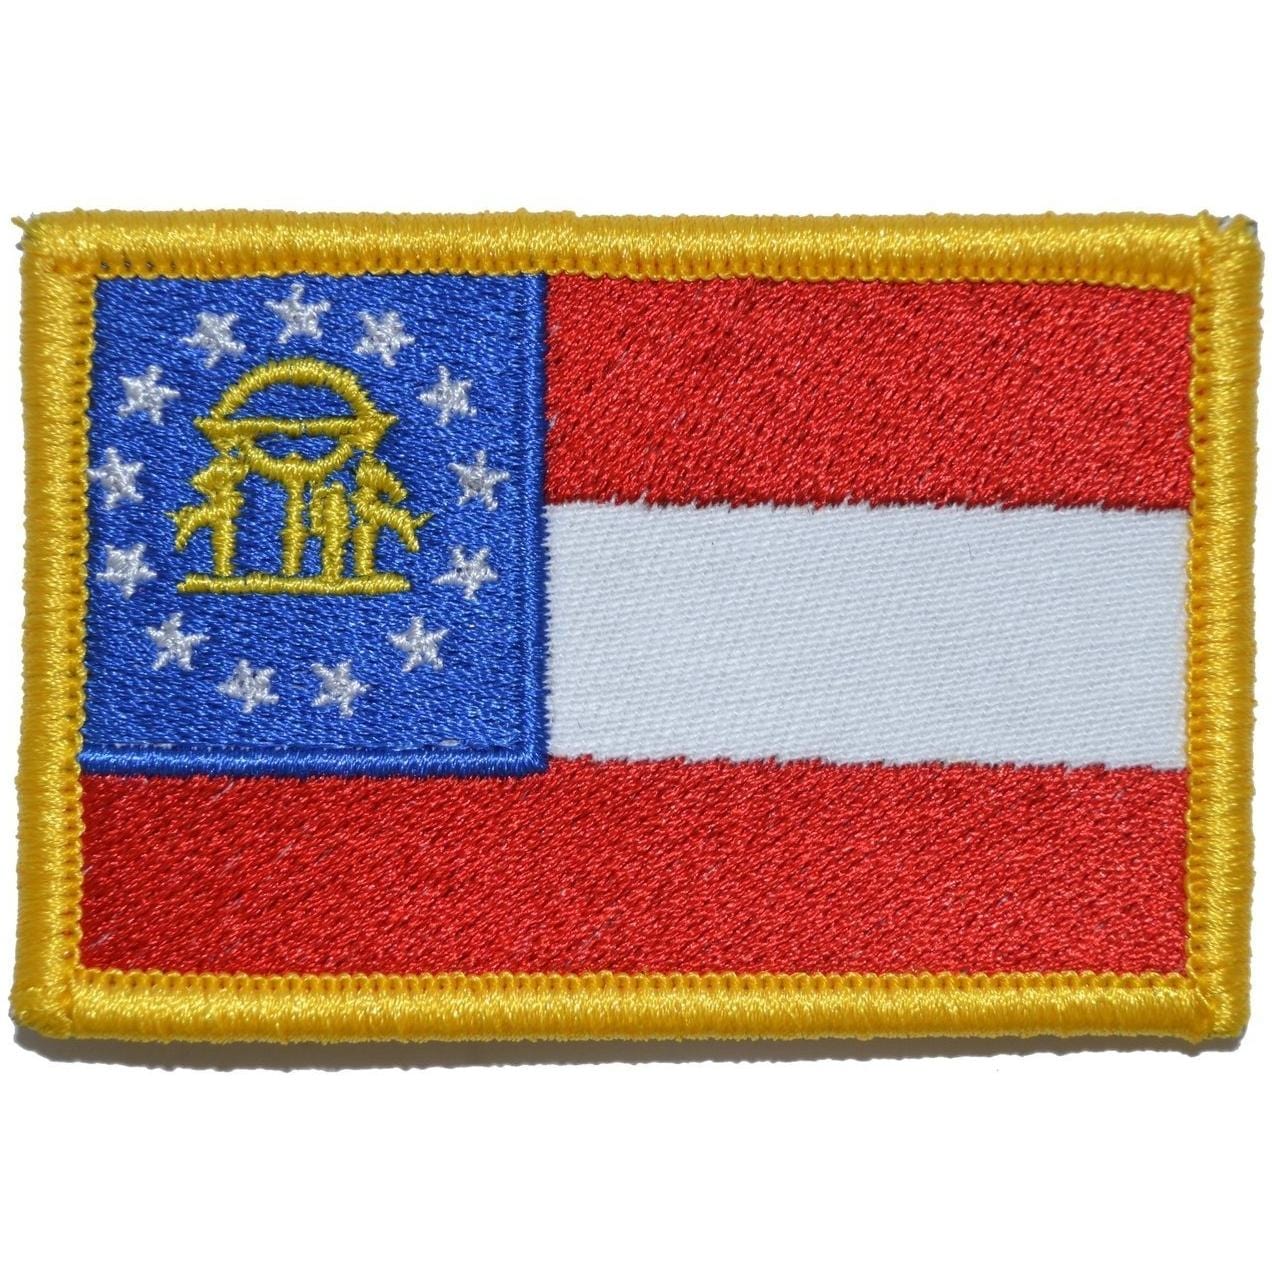 Tactical Gear Junkie Patches Full Color Georgia State Flag - 2x3 Patch